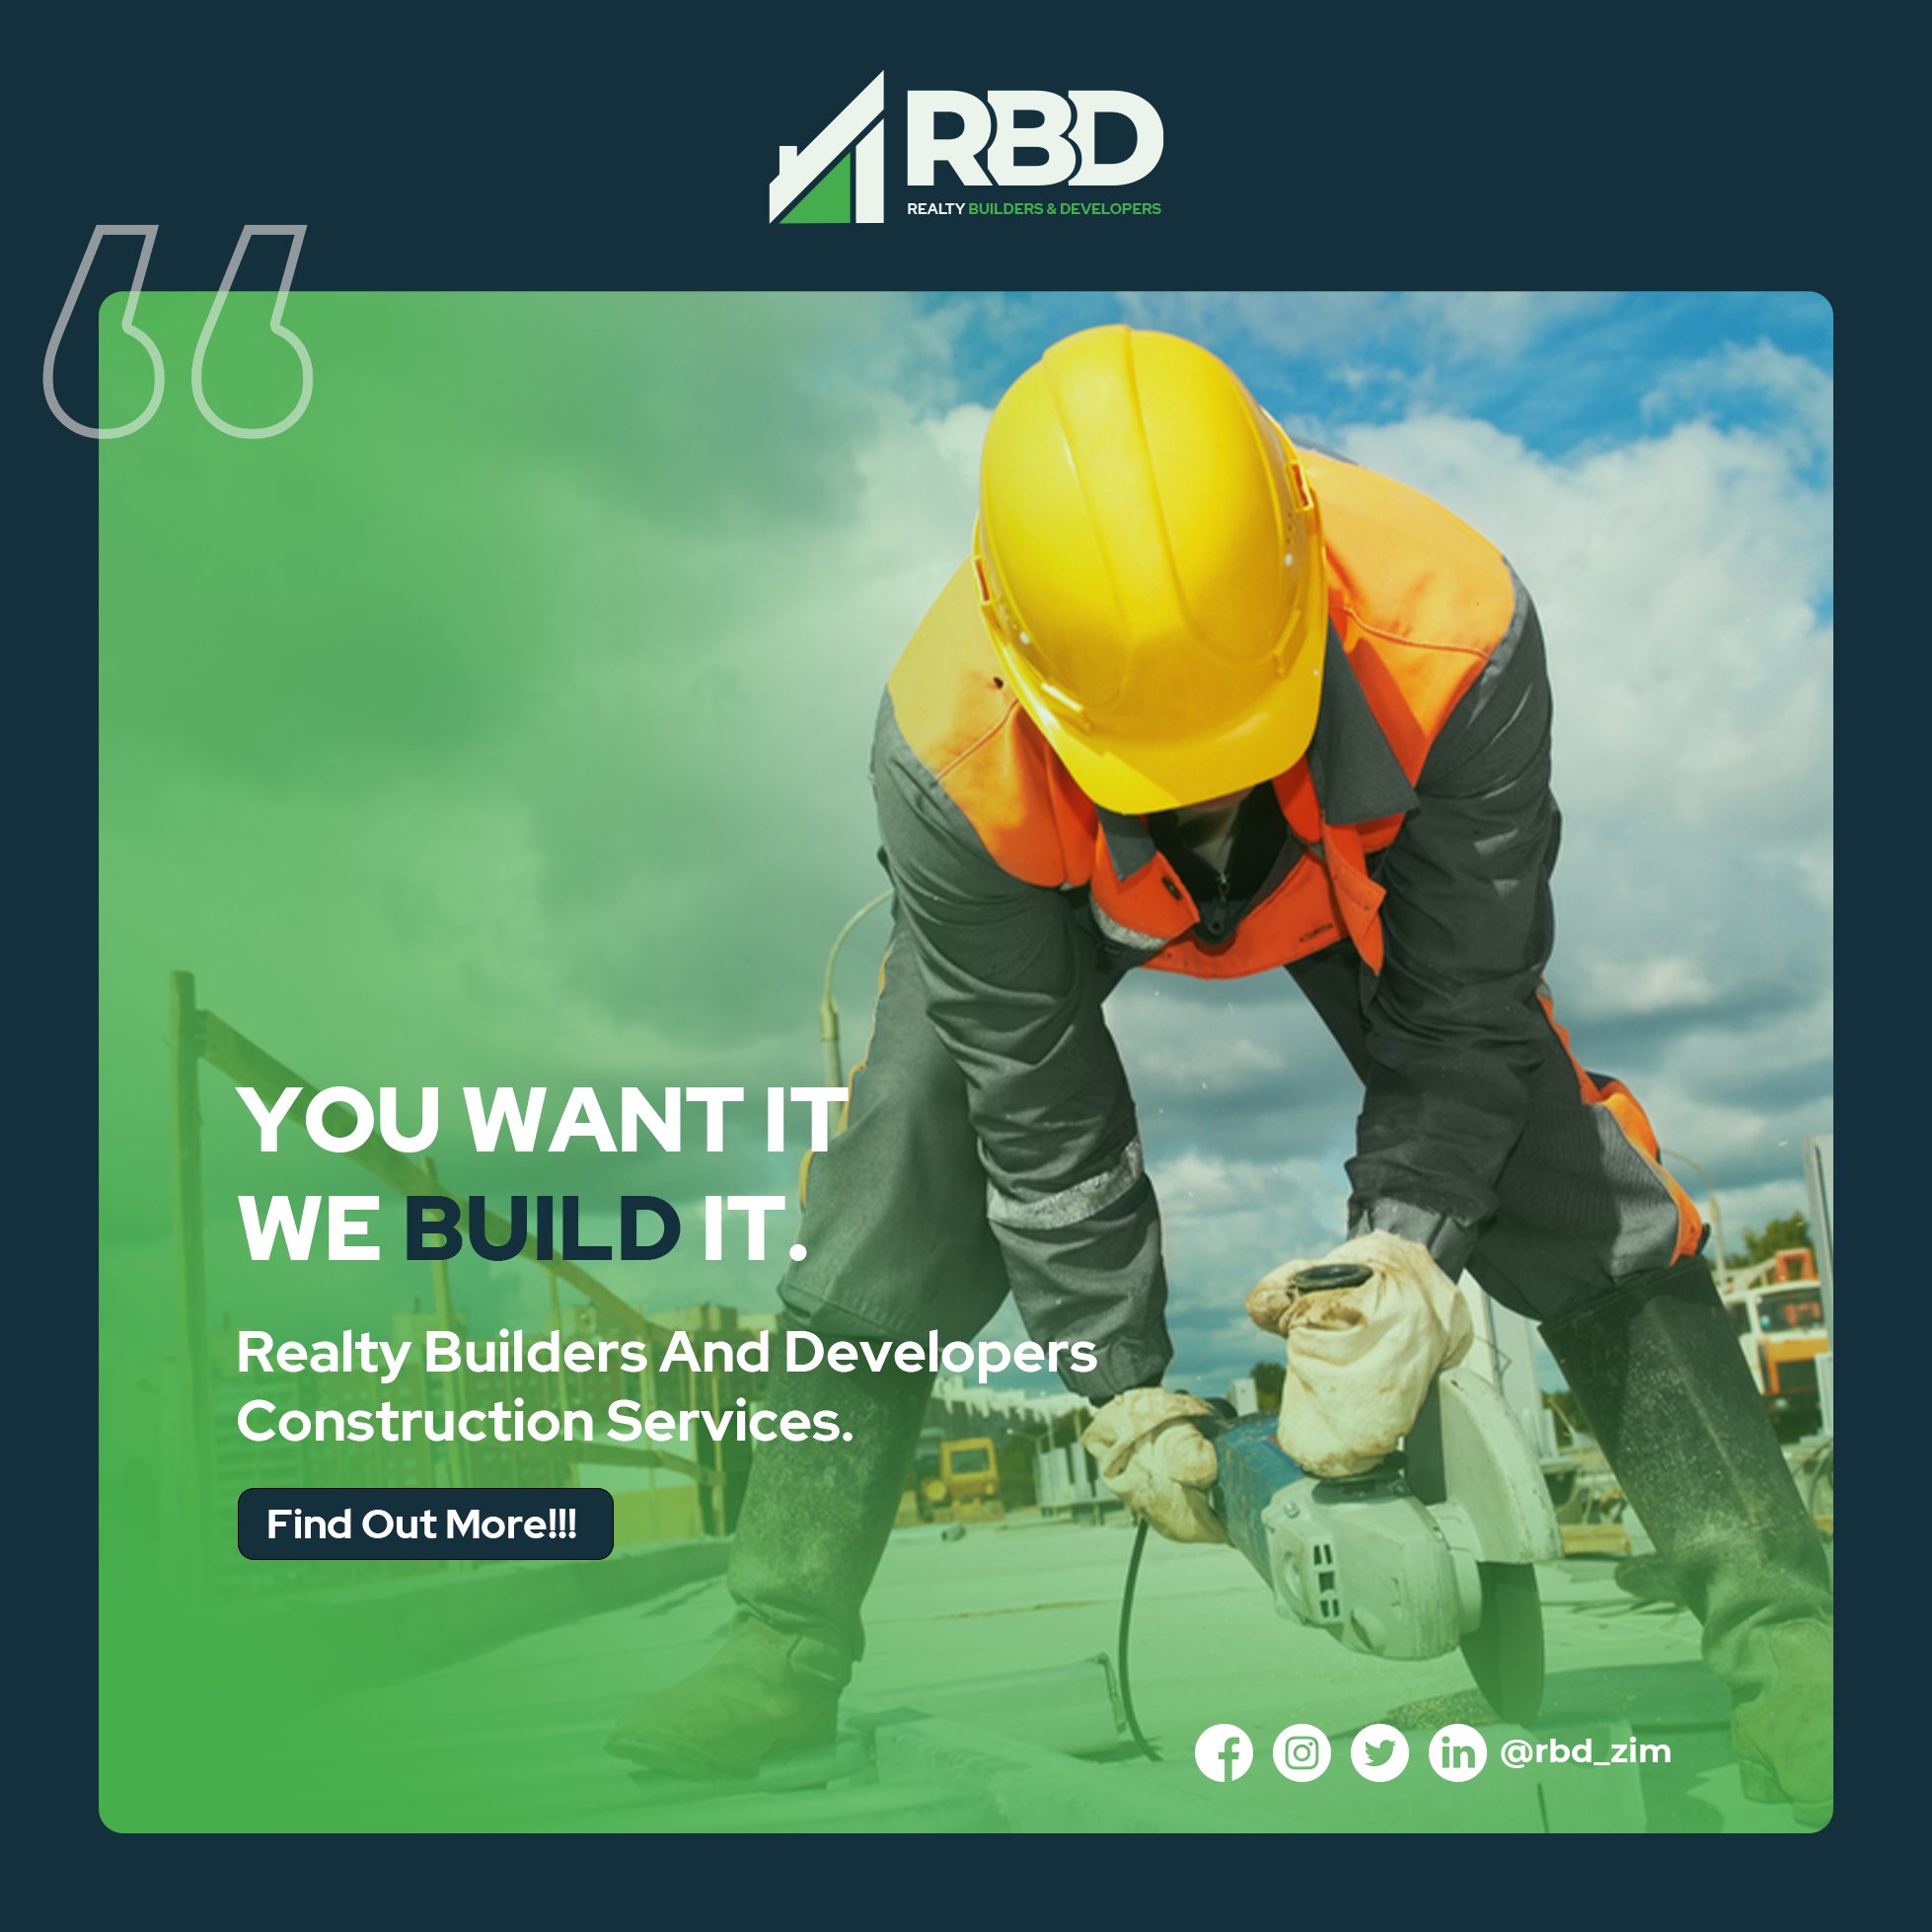 realty-builders-and-developers-rbd-zim-twitter